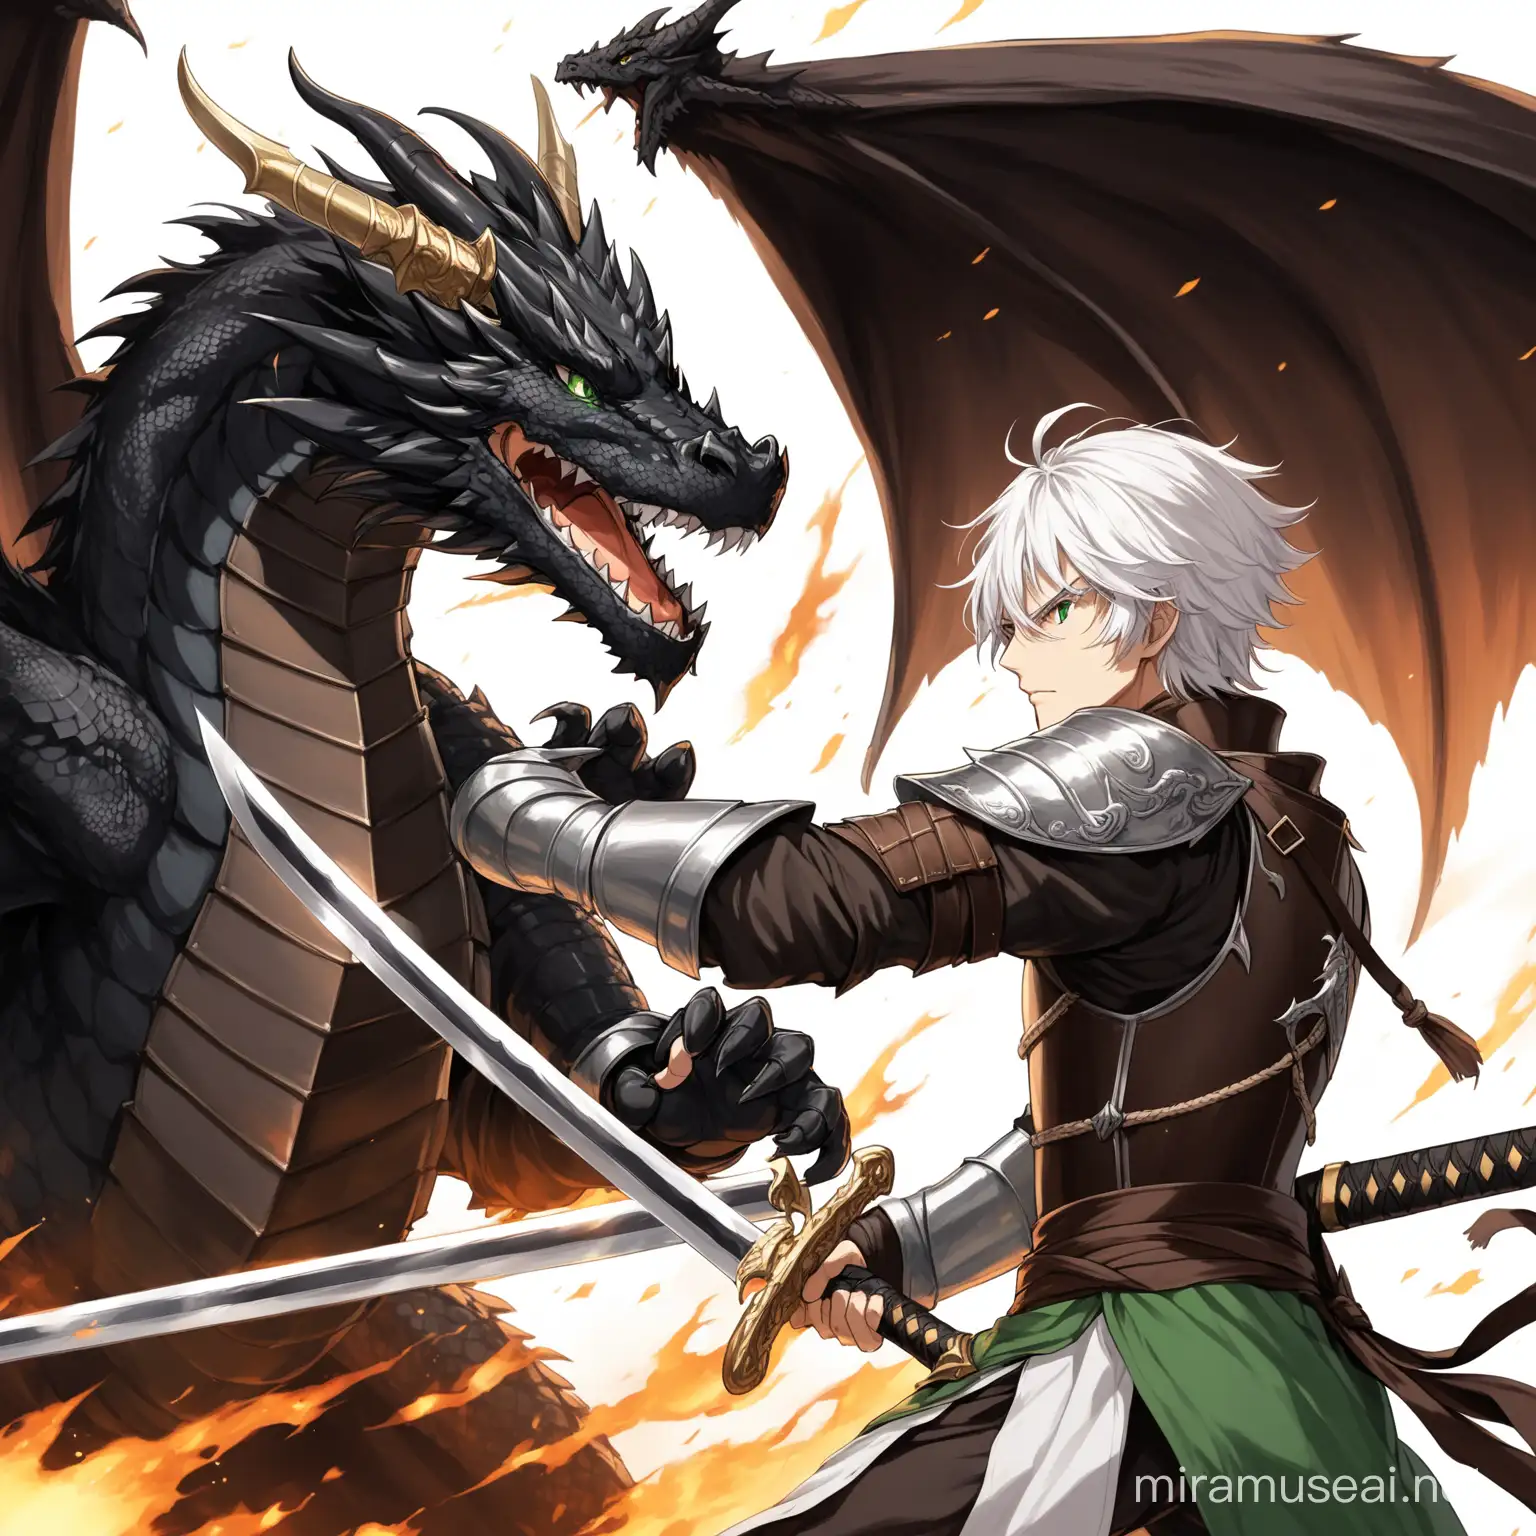 white haired, elevn male, swordsman, green eyes, with dark brown leather armor, fighting a black dragon.